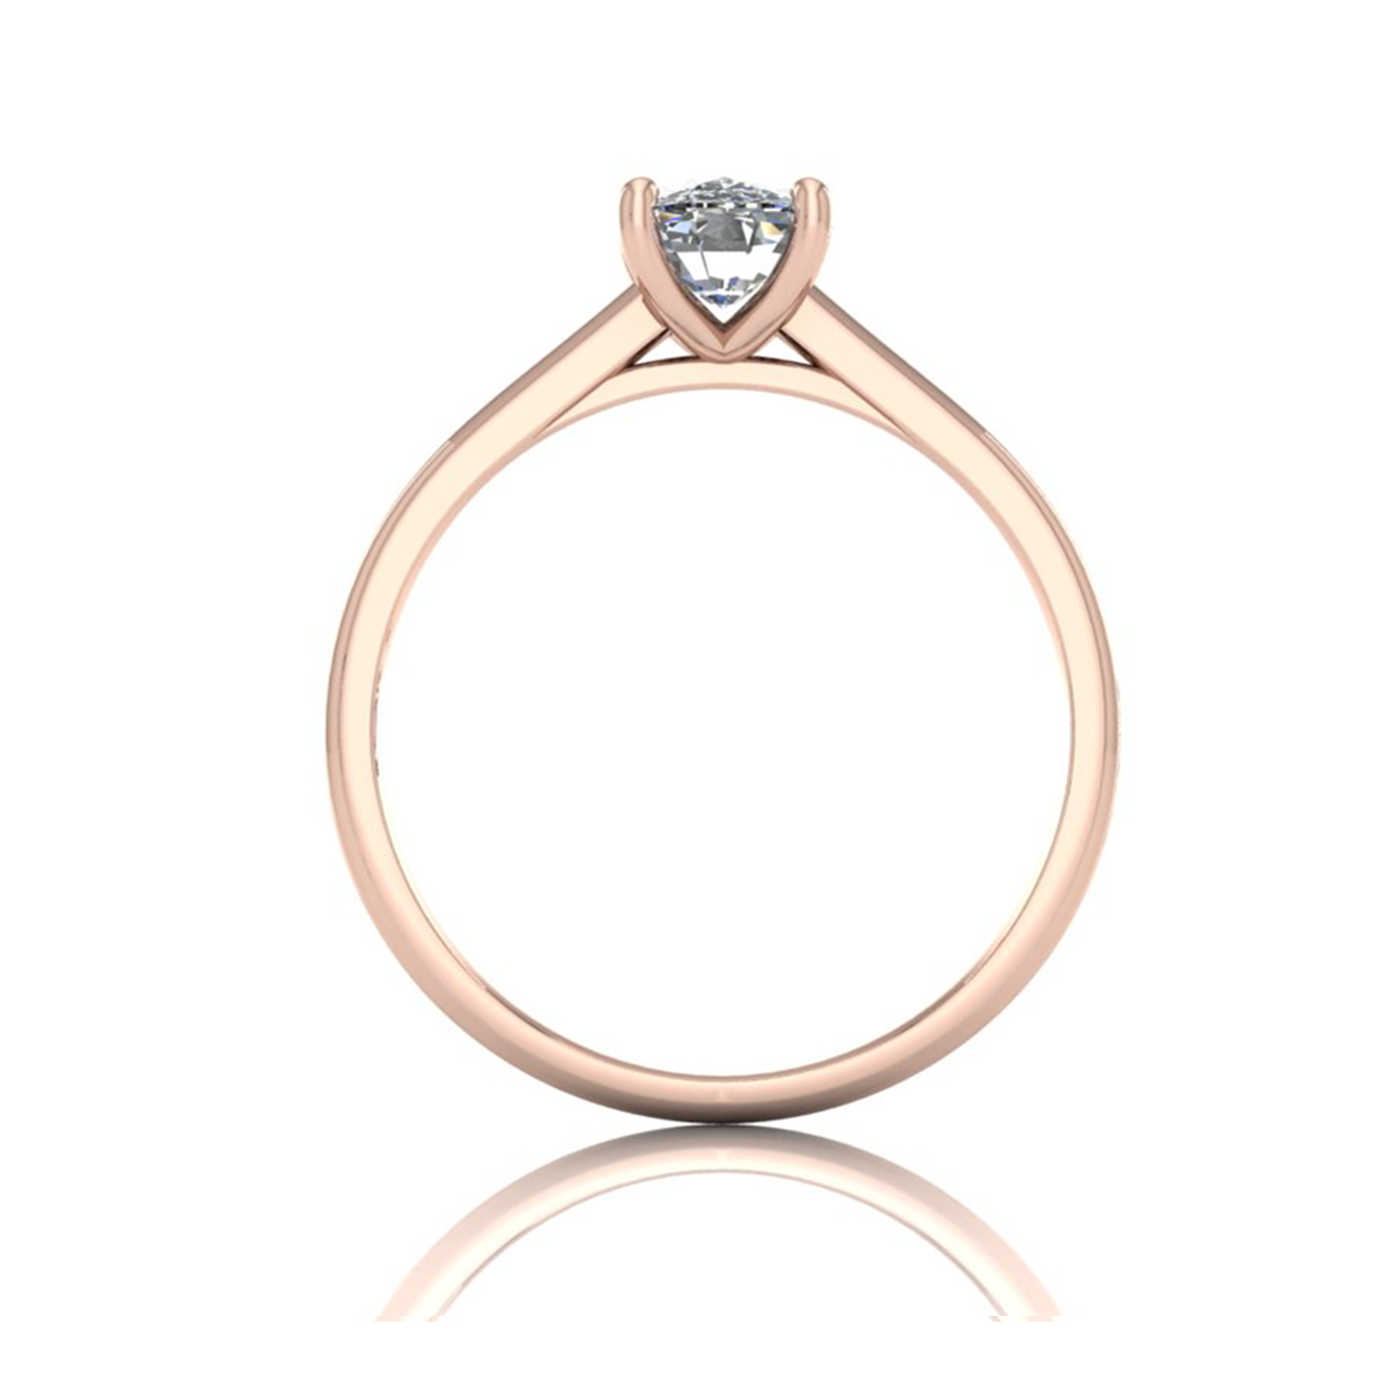 18k rose gold 1,20 ct 4 prongs solitaire elongated cushion cut diamond engagement ring with whisper thin band Photos & images